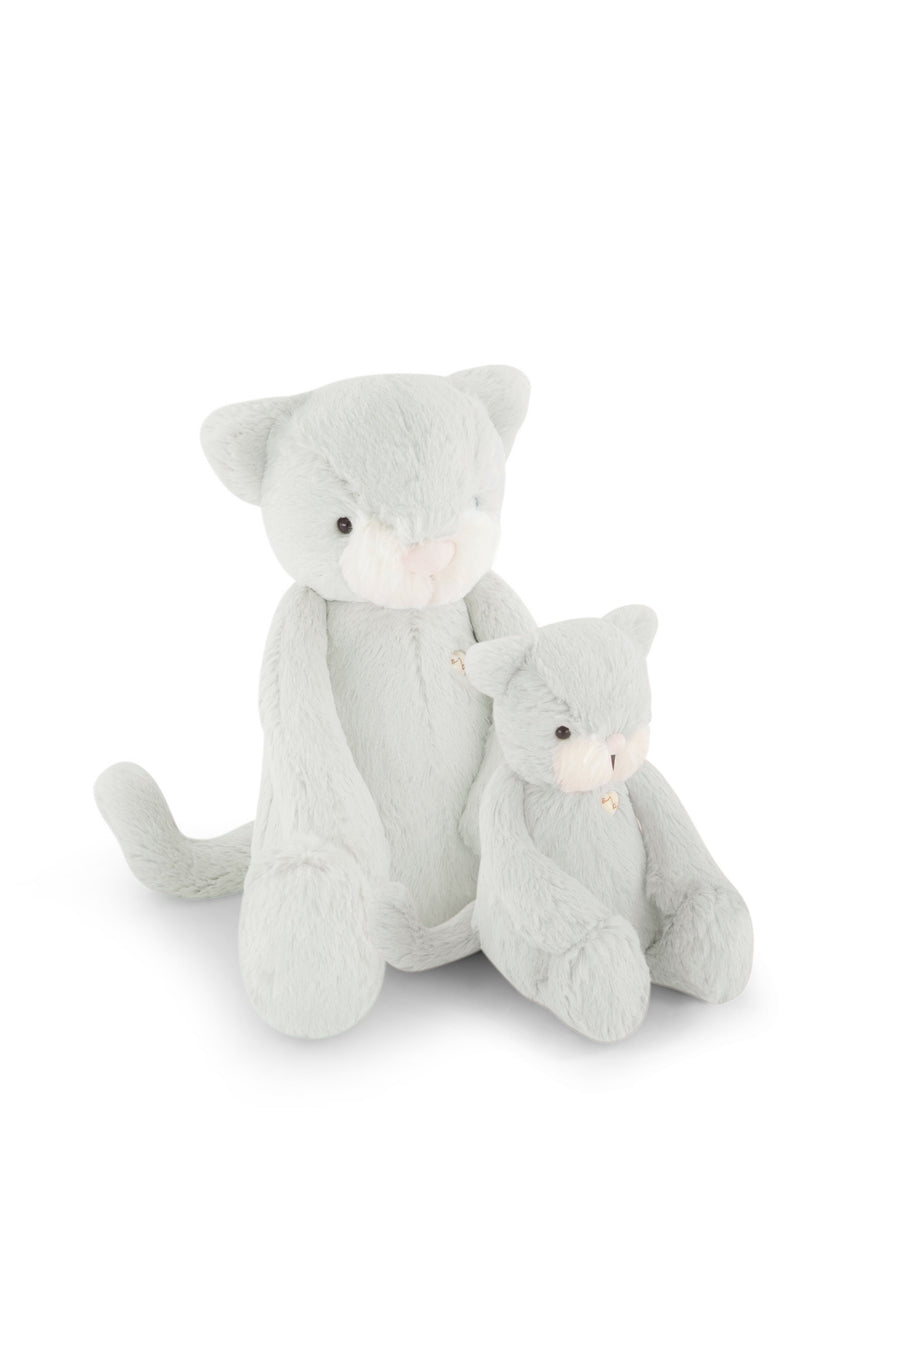 Snuggle Bunnies - Elsie the Kitty - Willow Childrens Toy from Jamie Kay NZ